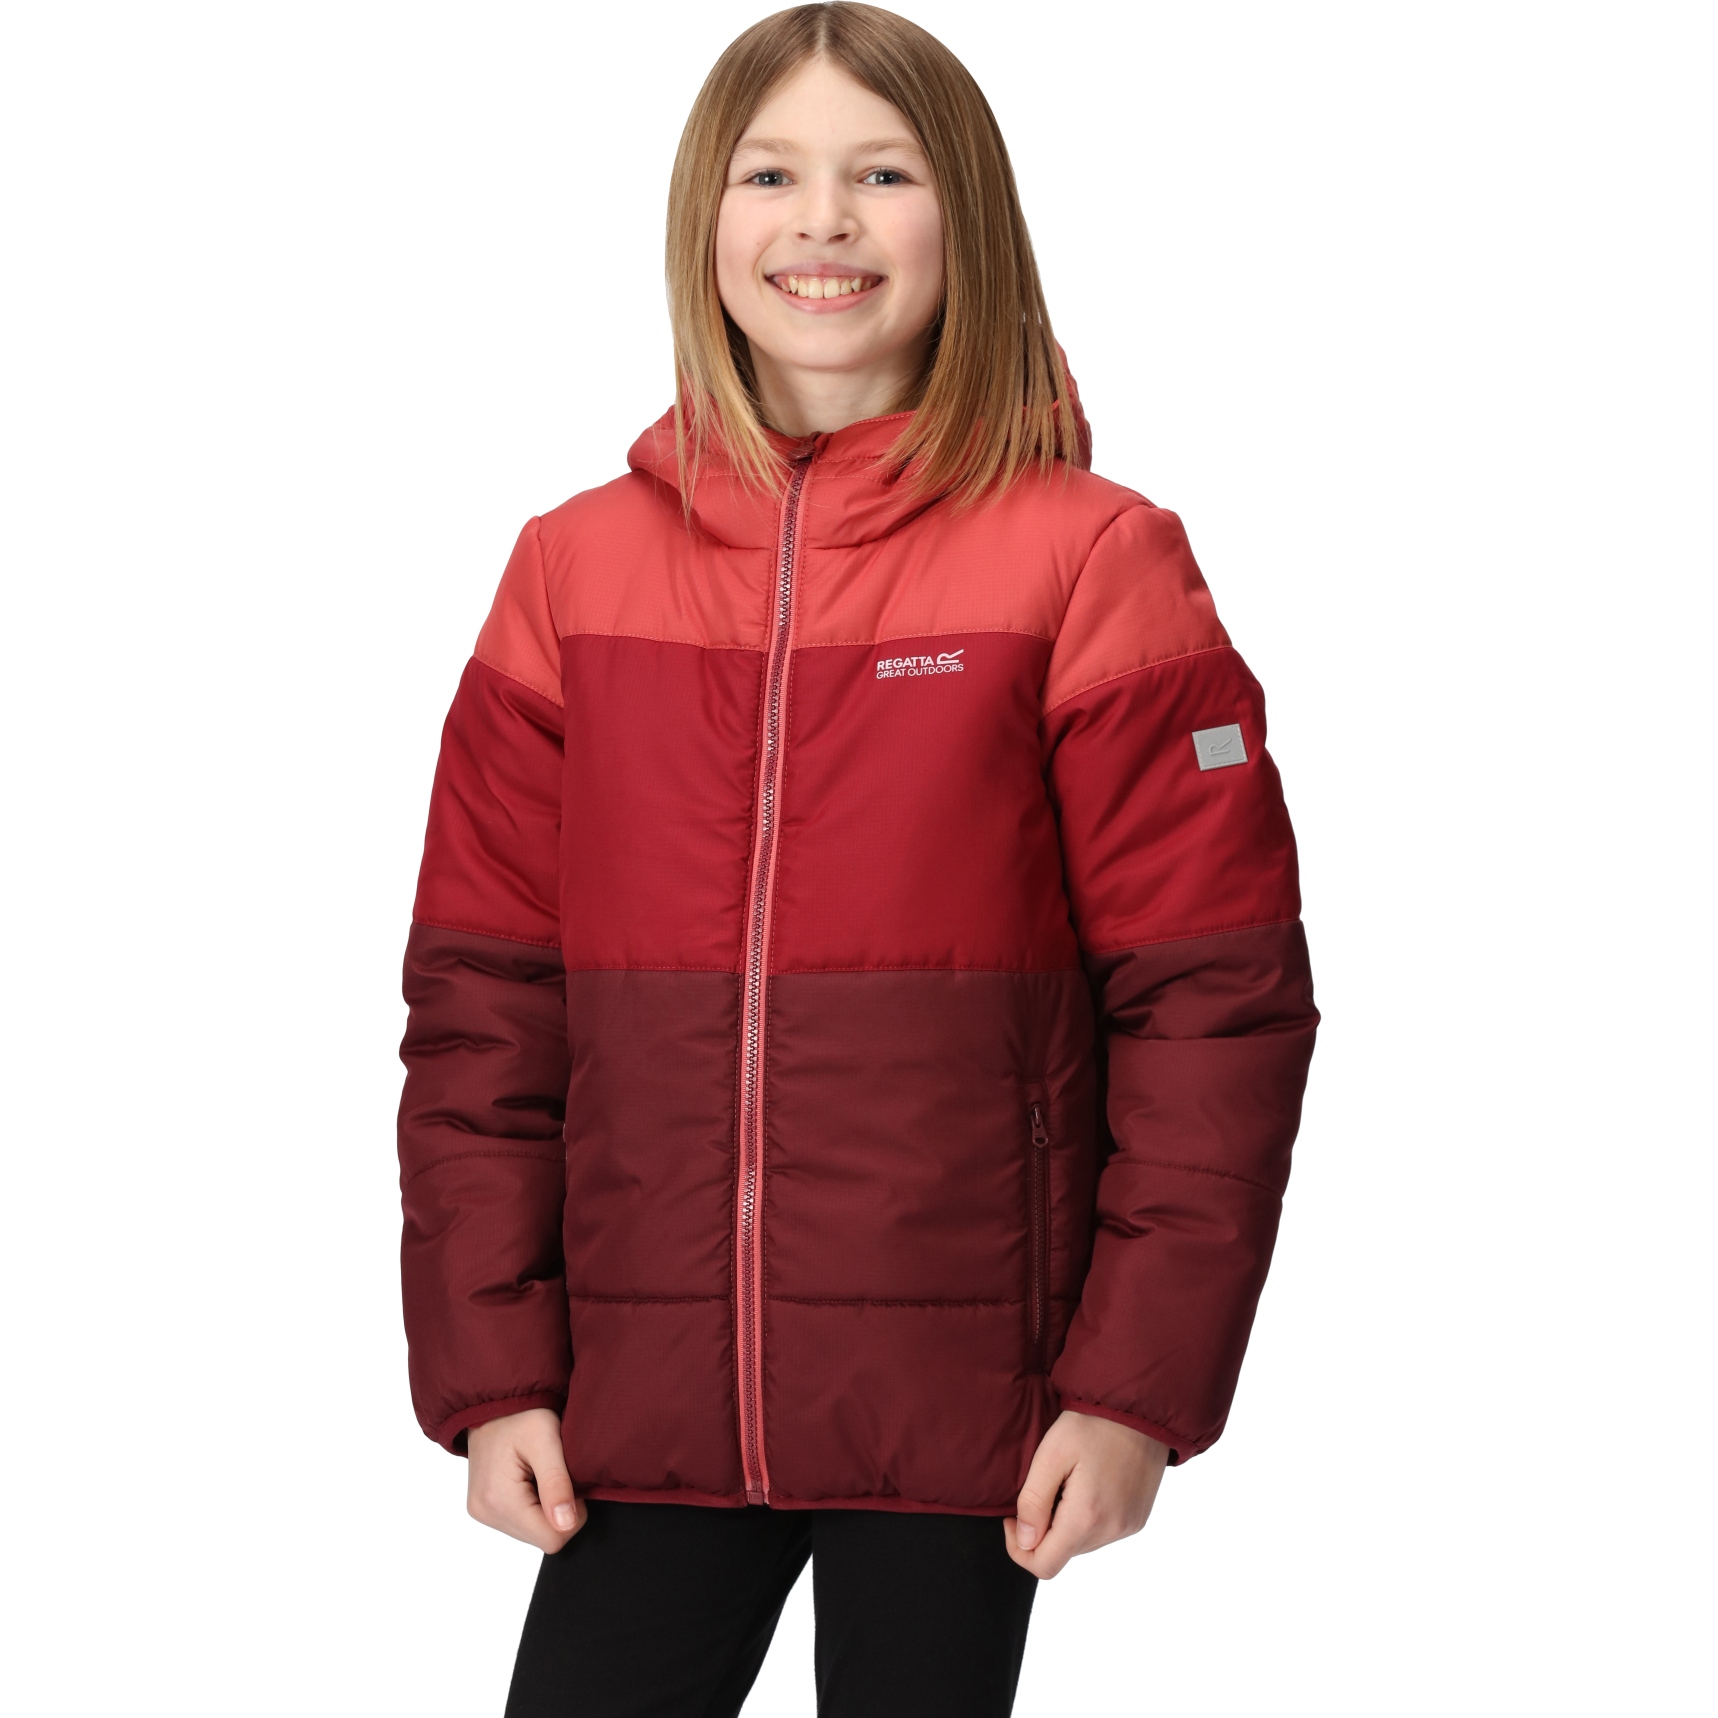 Image of Regatta Lofthouse VII Jacket Kids - Mineral Red/Rumba Red/Apricot Crush X8Z